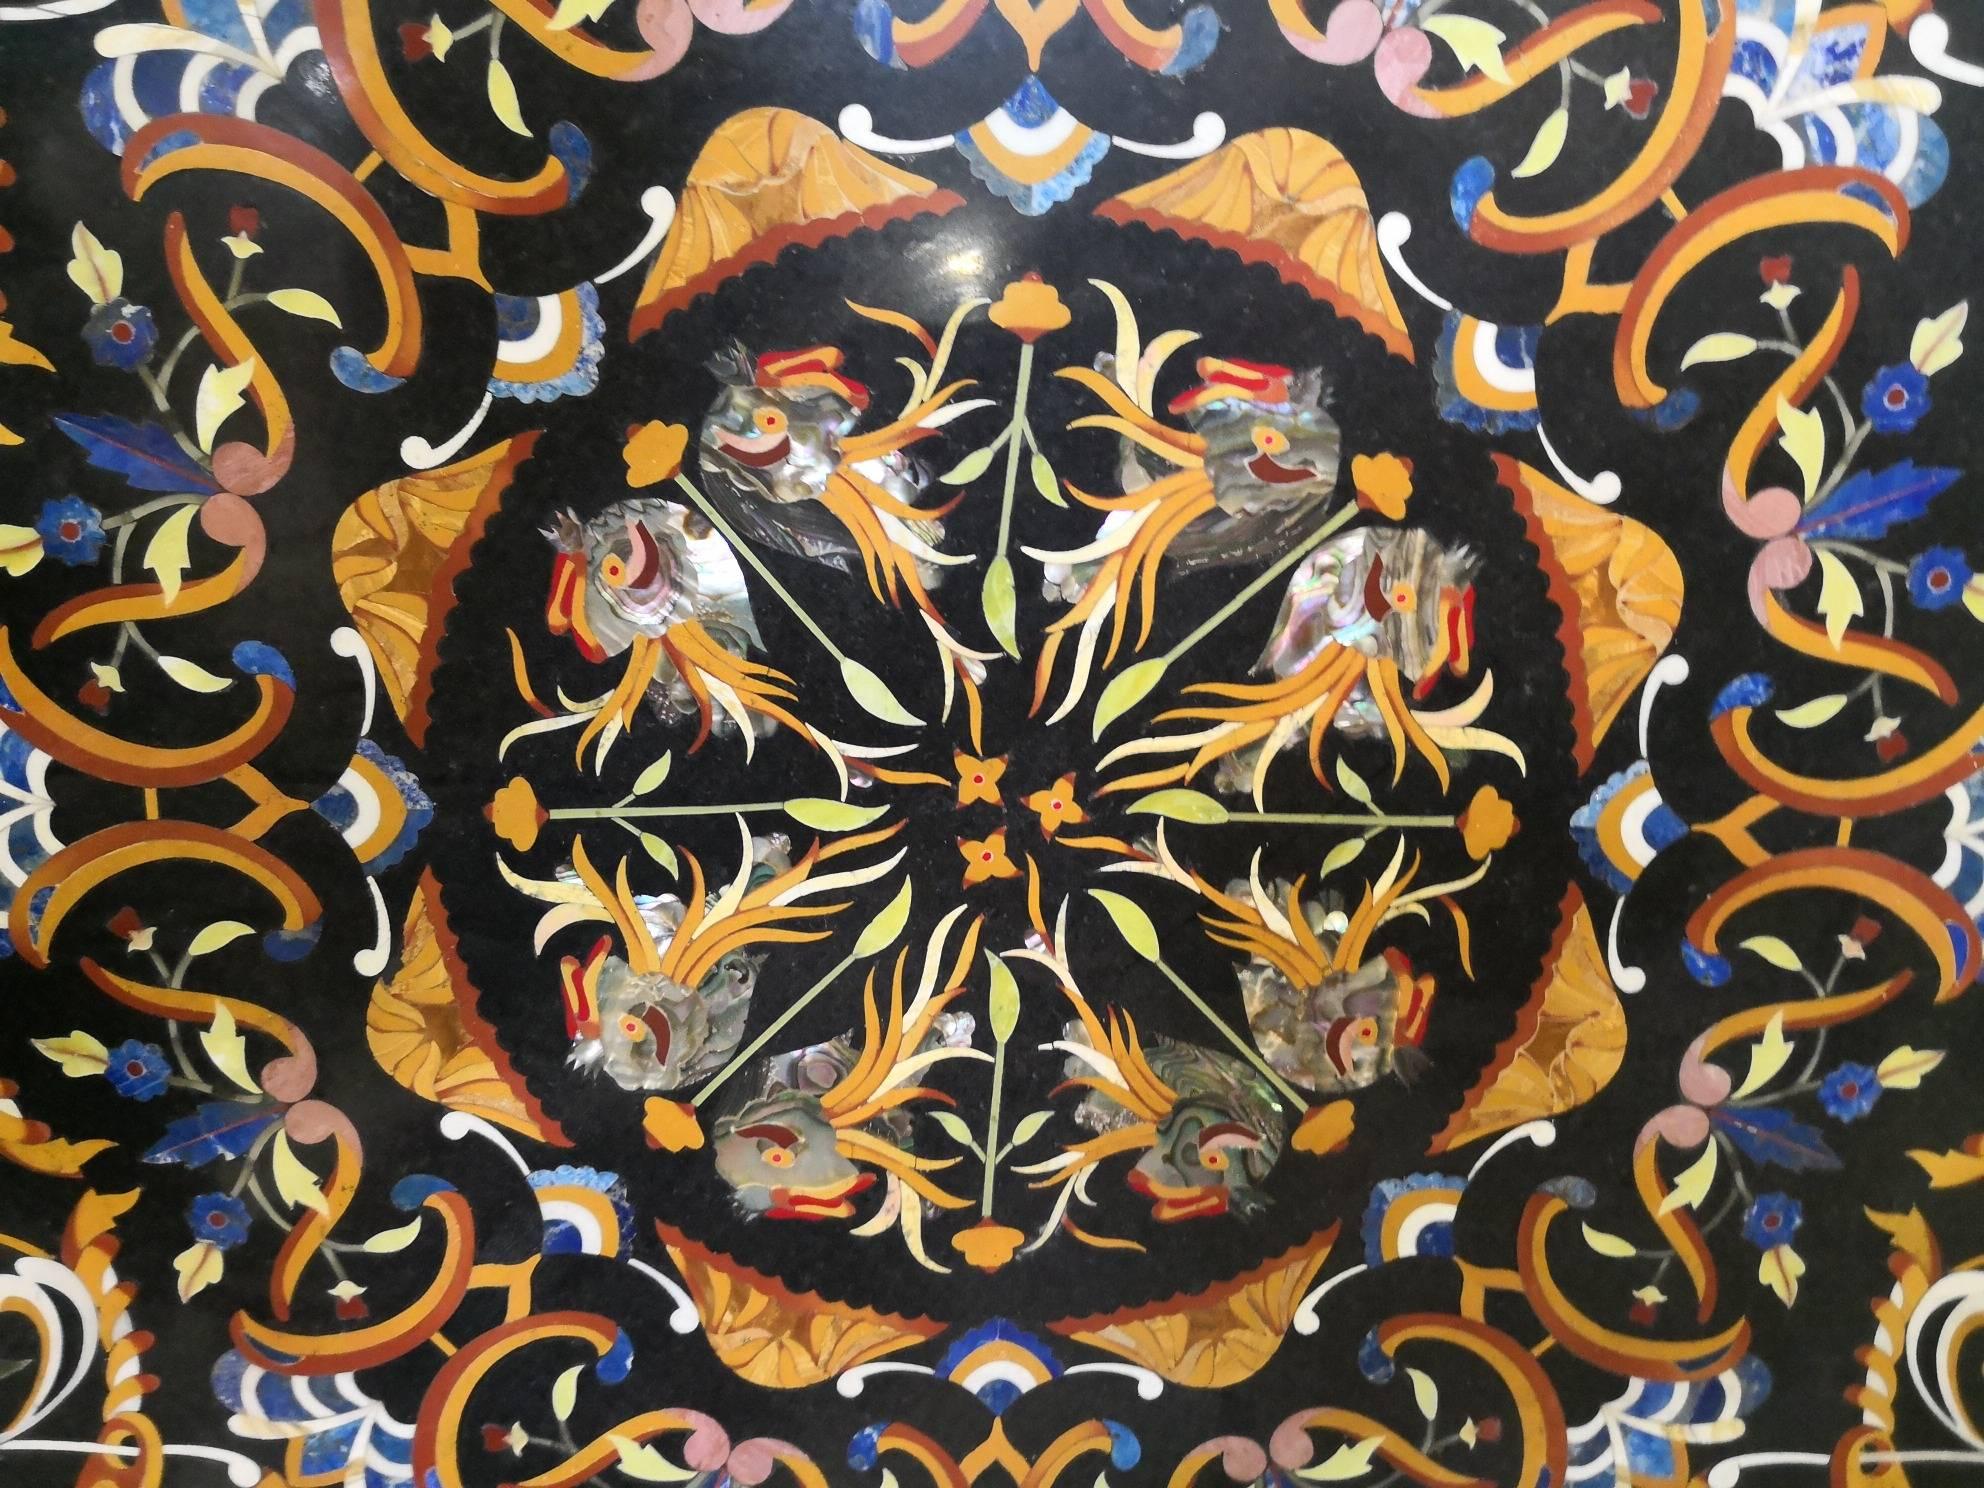 Handcrafted reproduction of Italian 1700s ornamental design on black Belgian marble tabletop. Vases with flowers, clam shells, fishes and a myriad of elements are confirmed by the clever use of Pietre Dure, semiprecious hard-stones: green malachite,